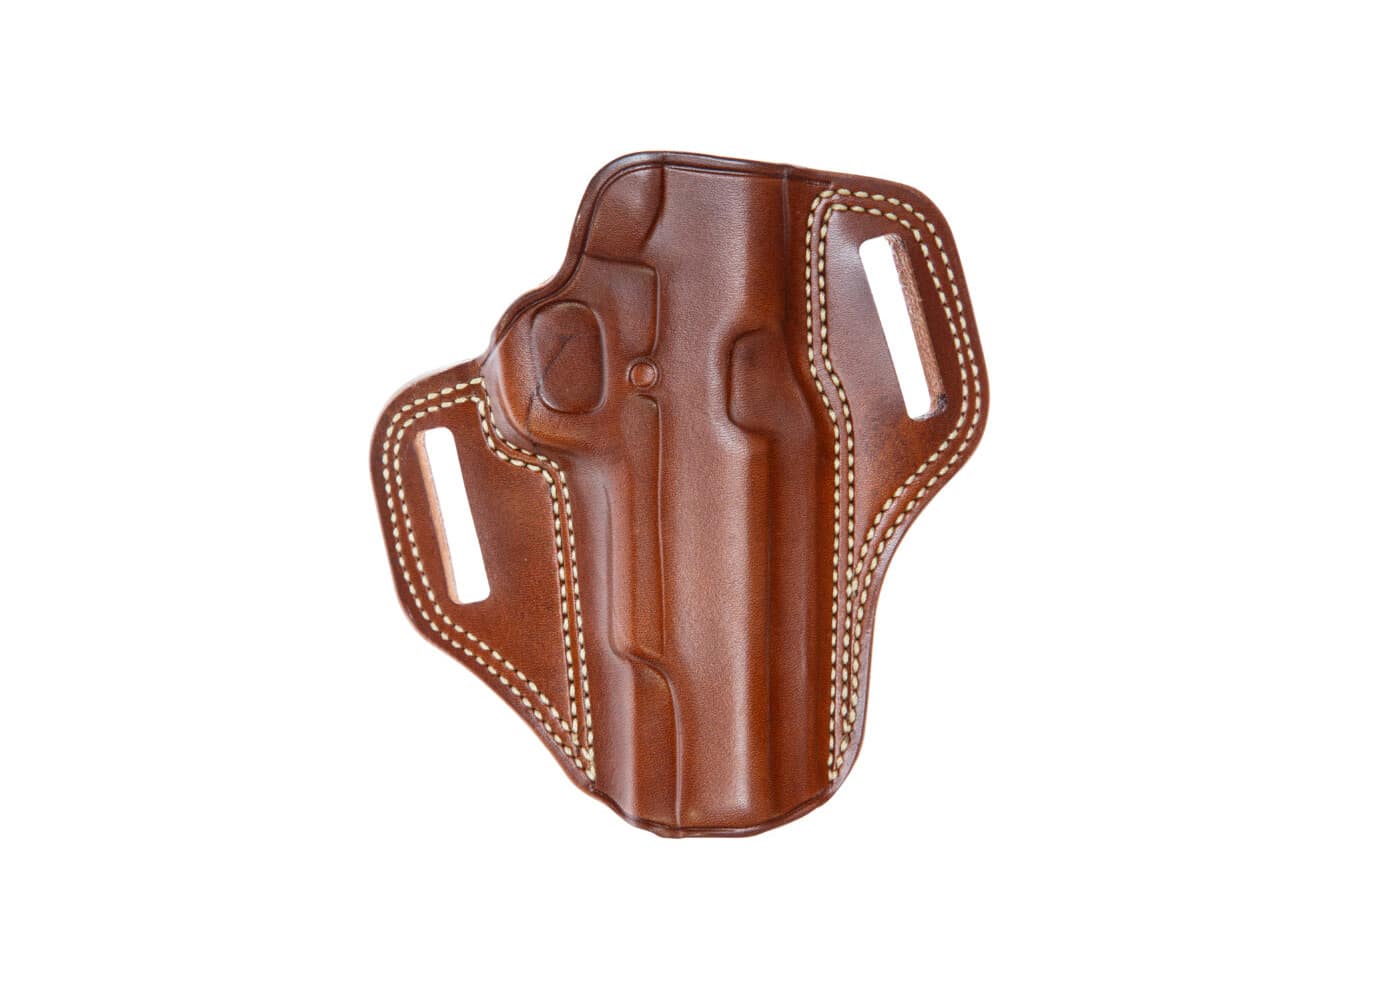 Galco Combat Master leather holster for the Garrison 1911